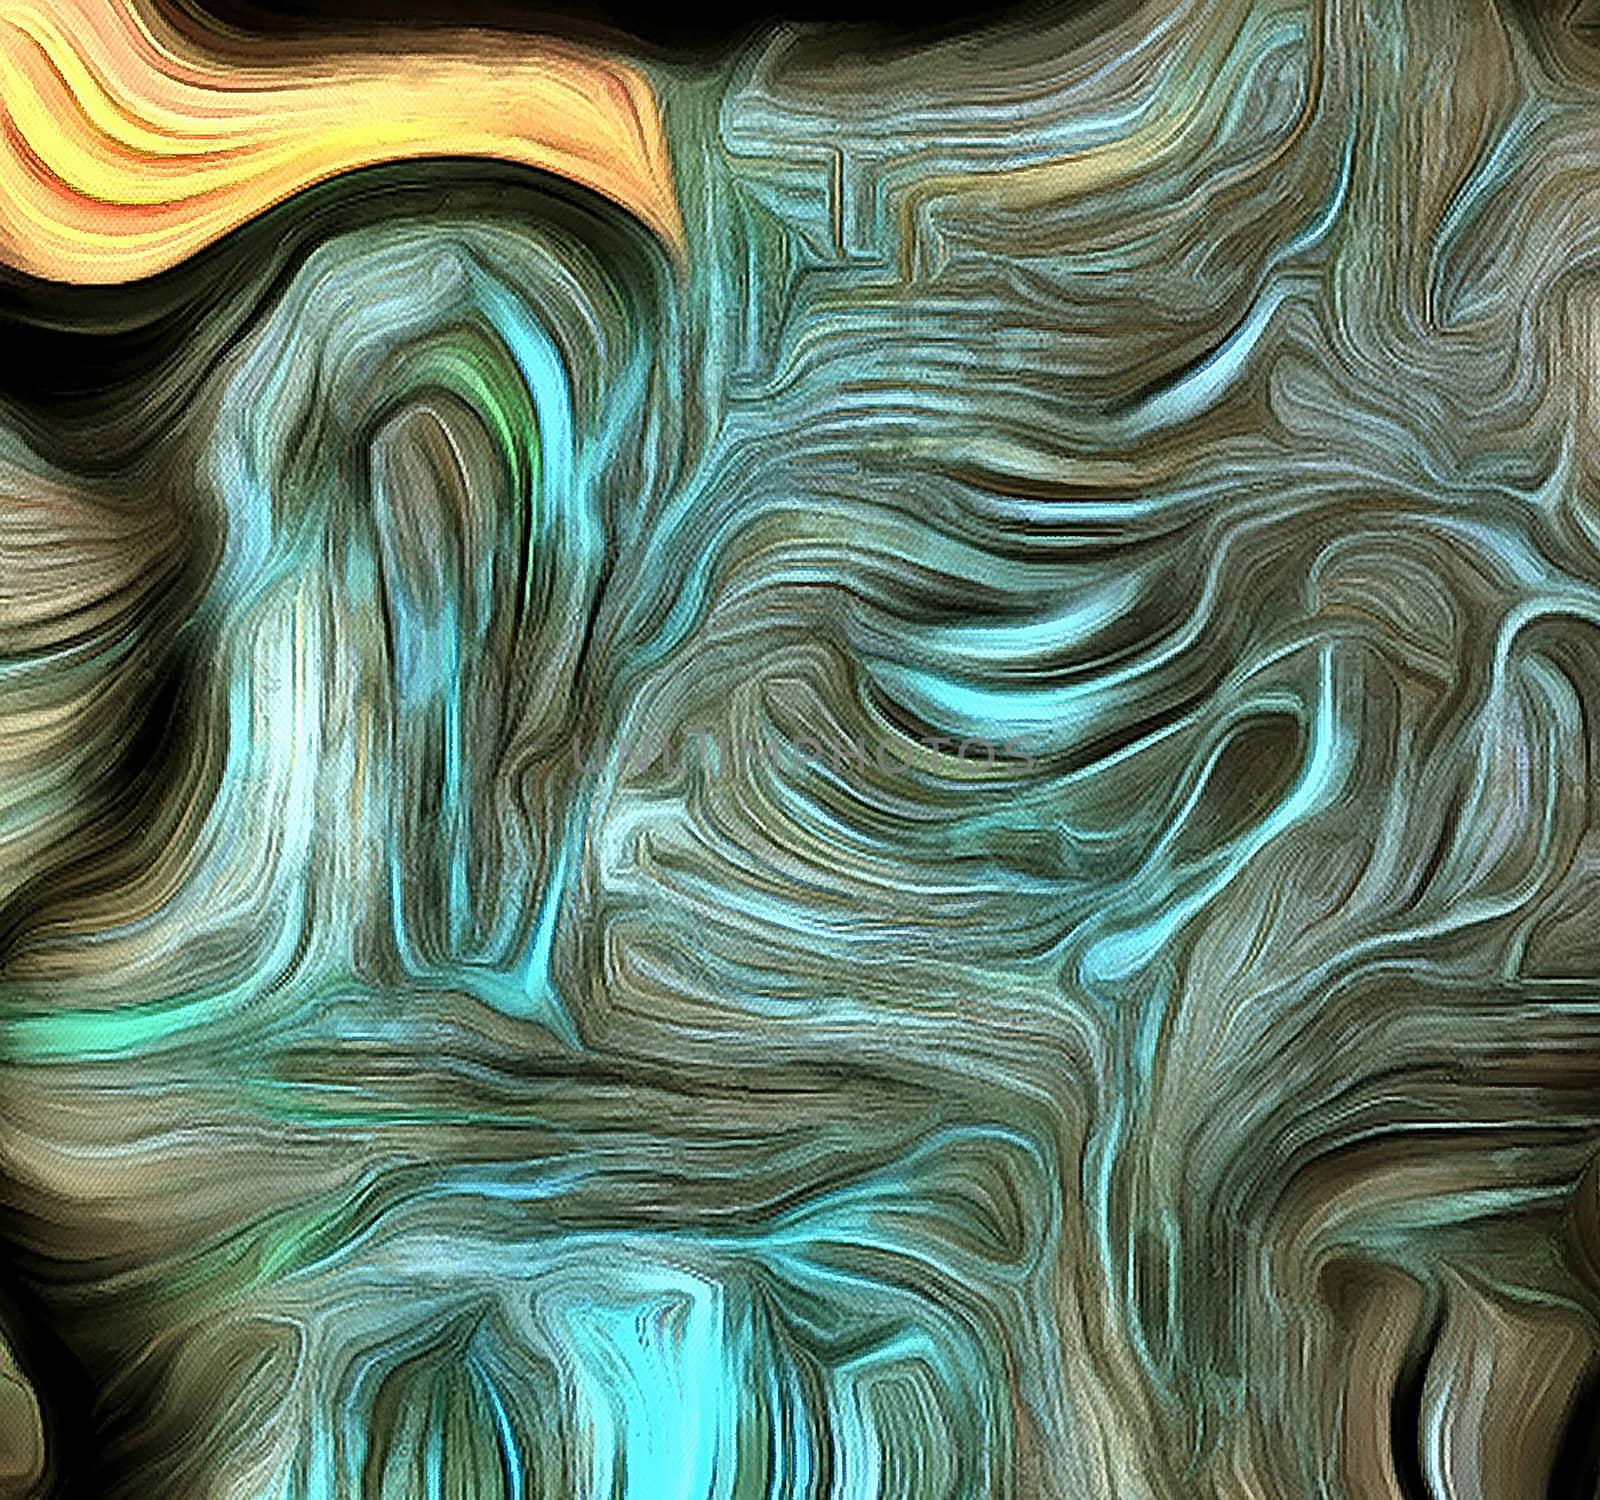 Dimensional Layered Abstract of Swirling Colors. 3D rendering